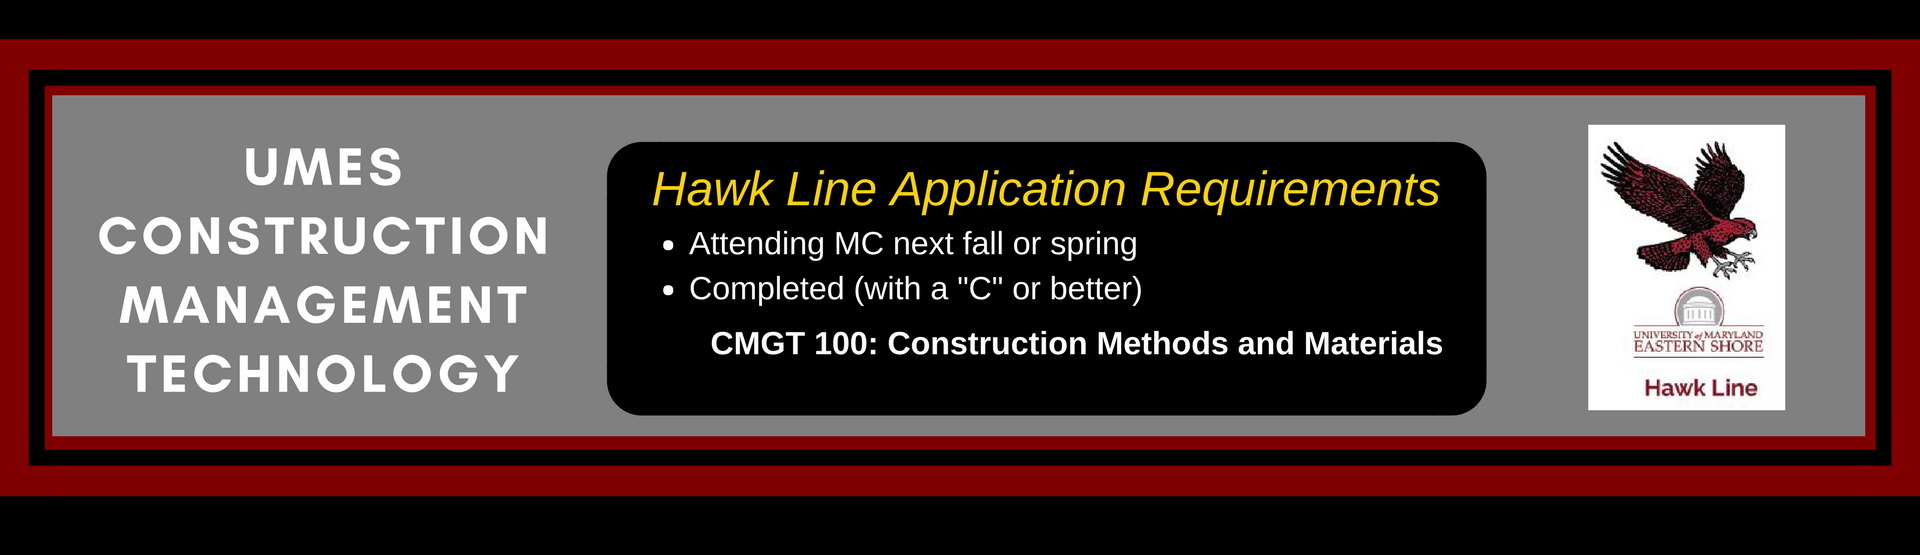 UMES Construction Management Technology Hawk Line Application Requirements: Attending MC next semester and completed CMGT 100